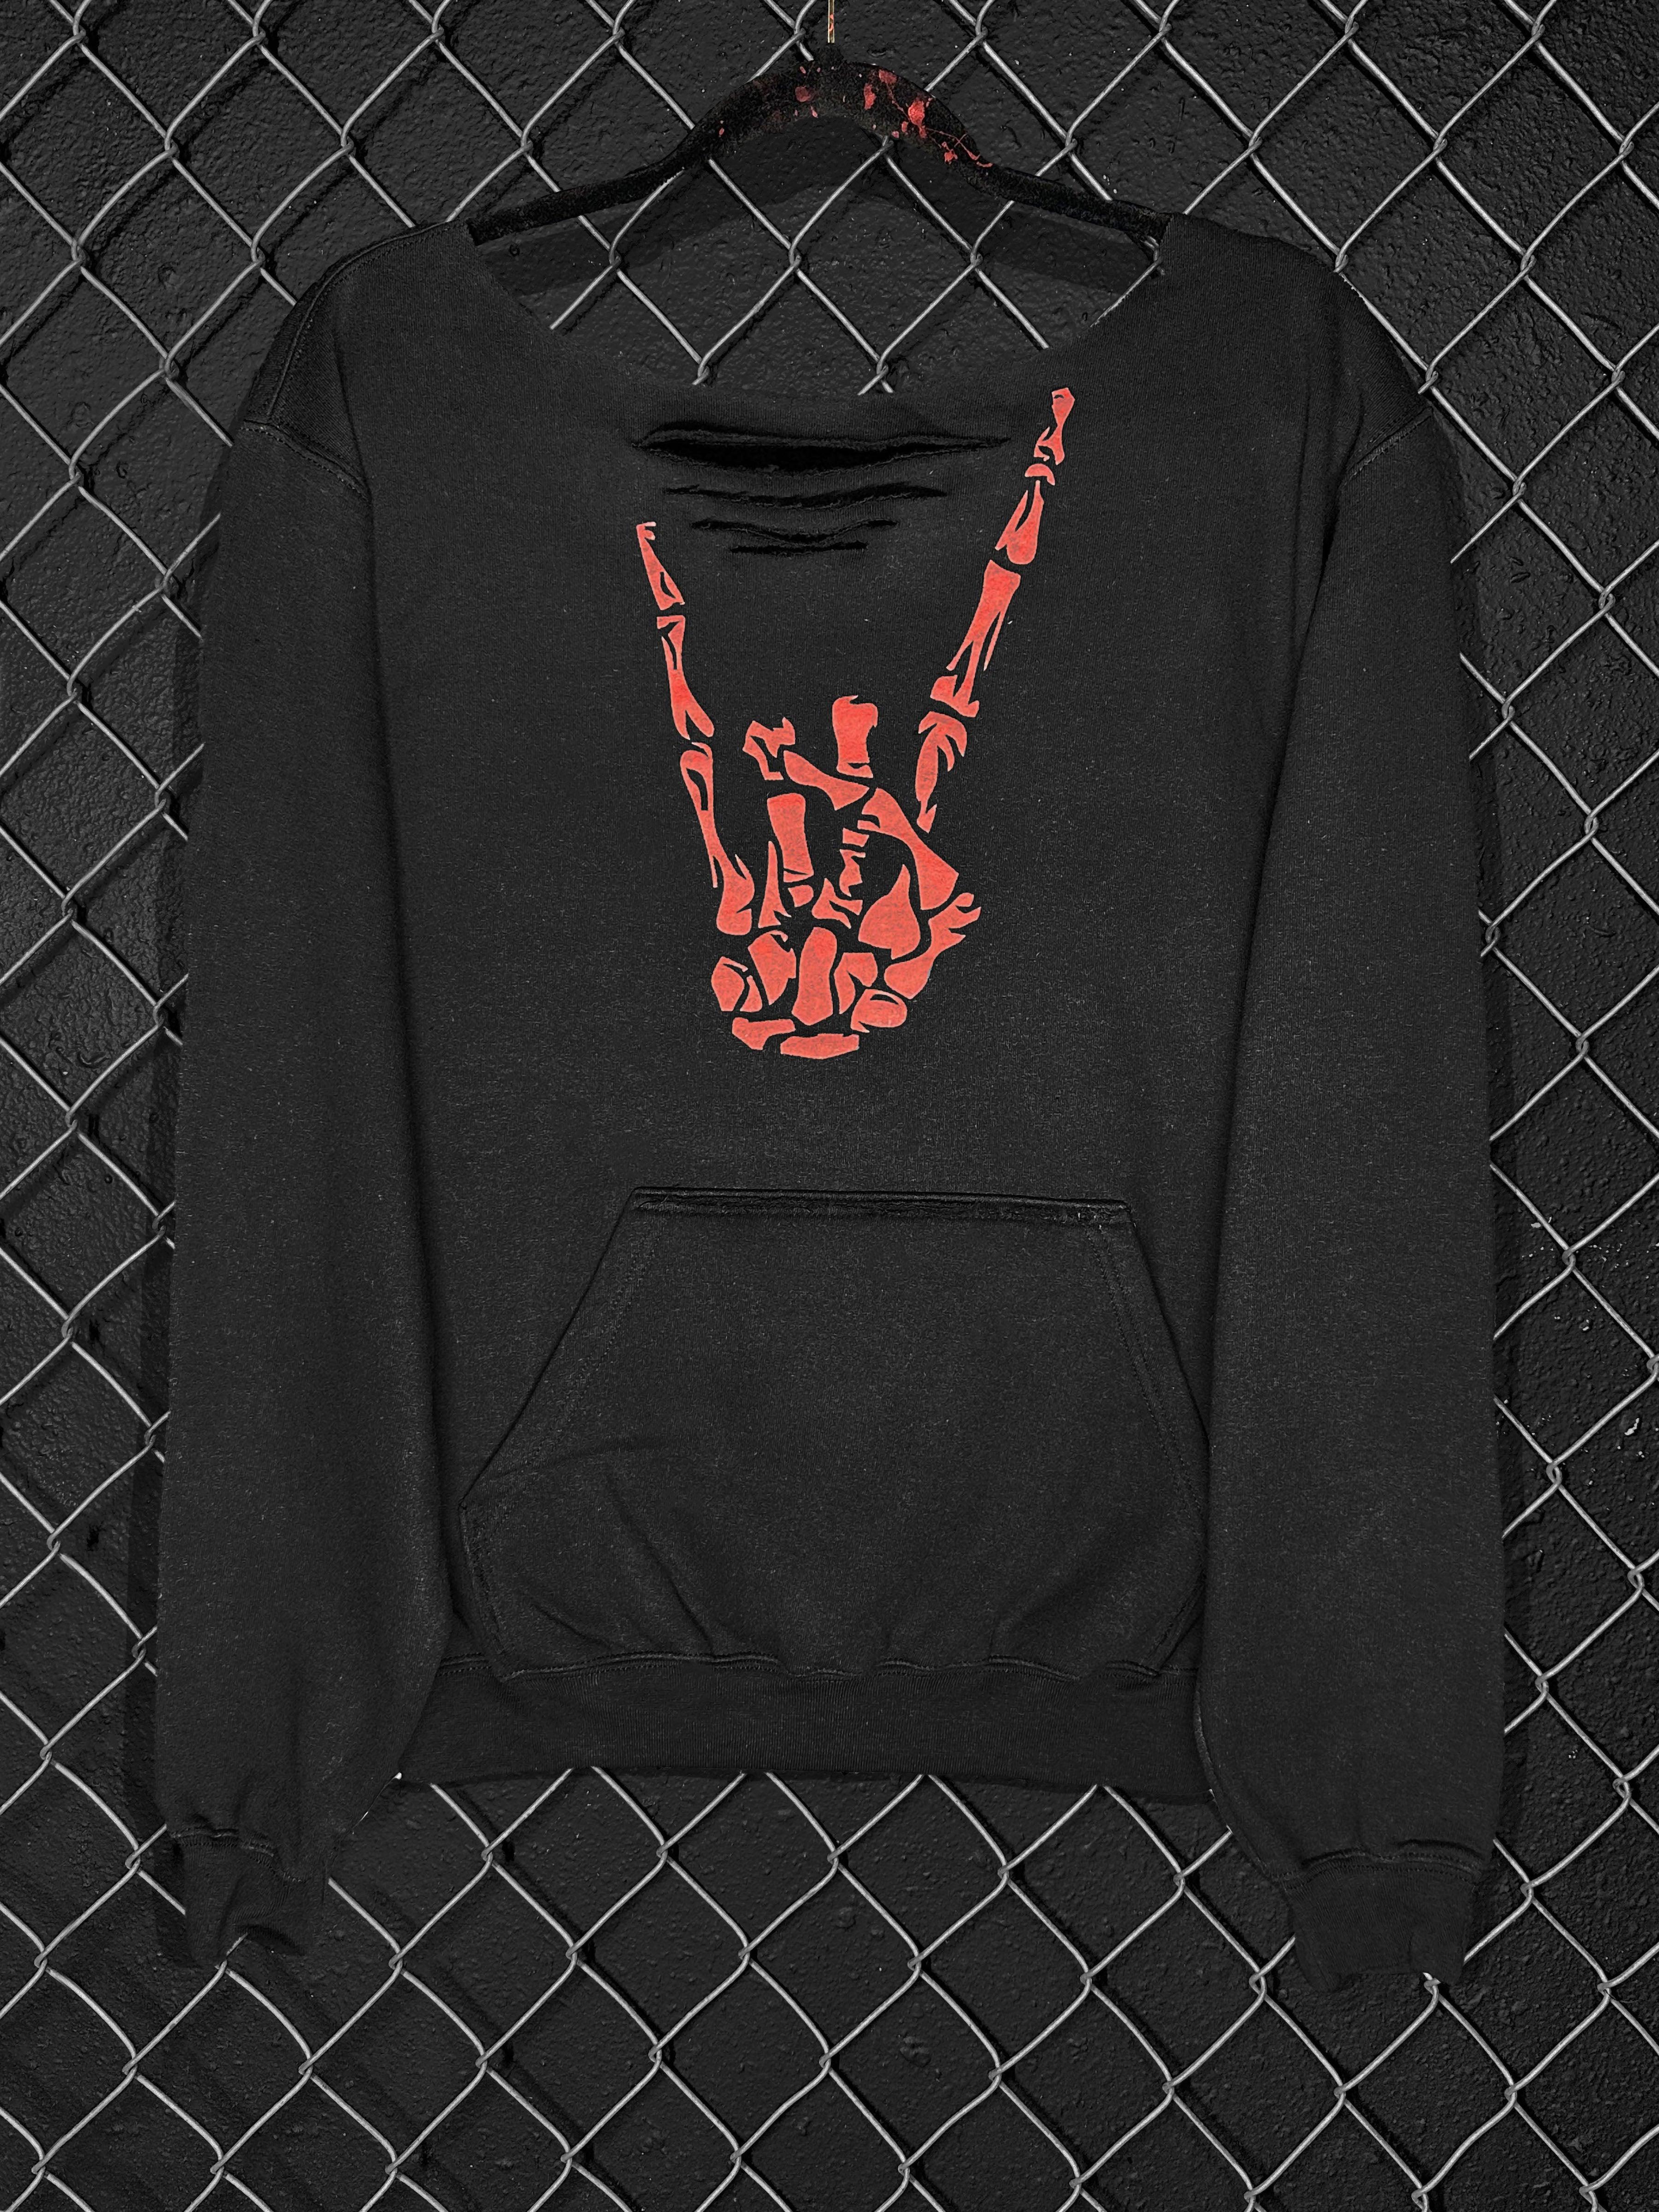 RED REGRET WIDE NECK SWEATSHIRT - The Drive Clothing